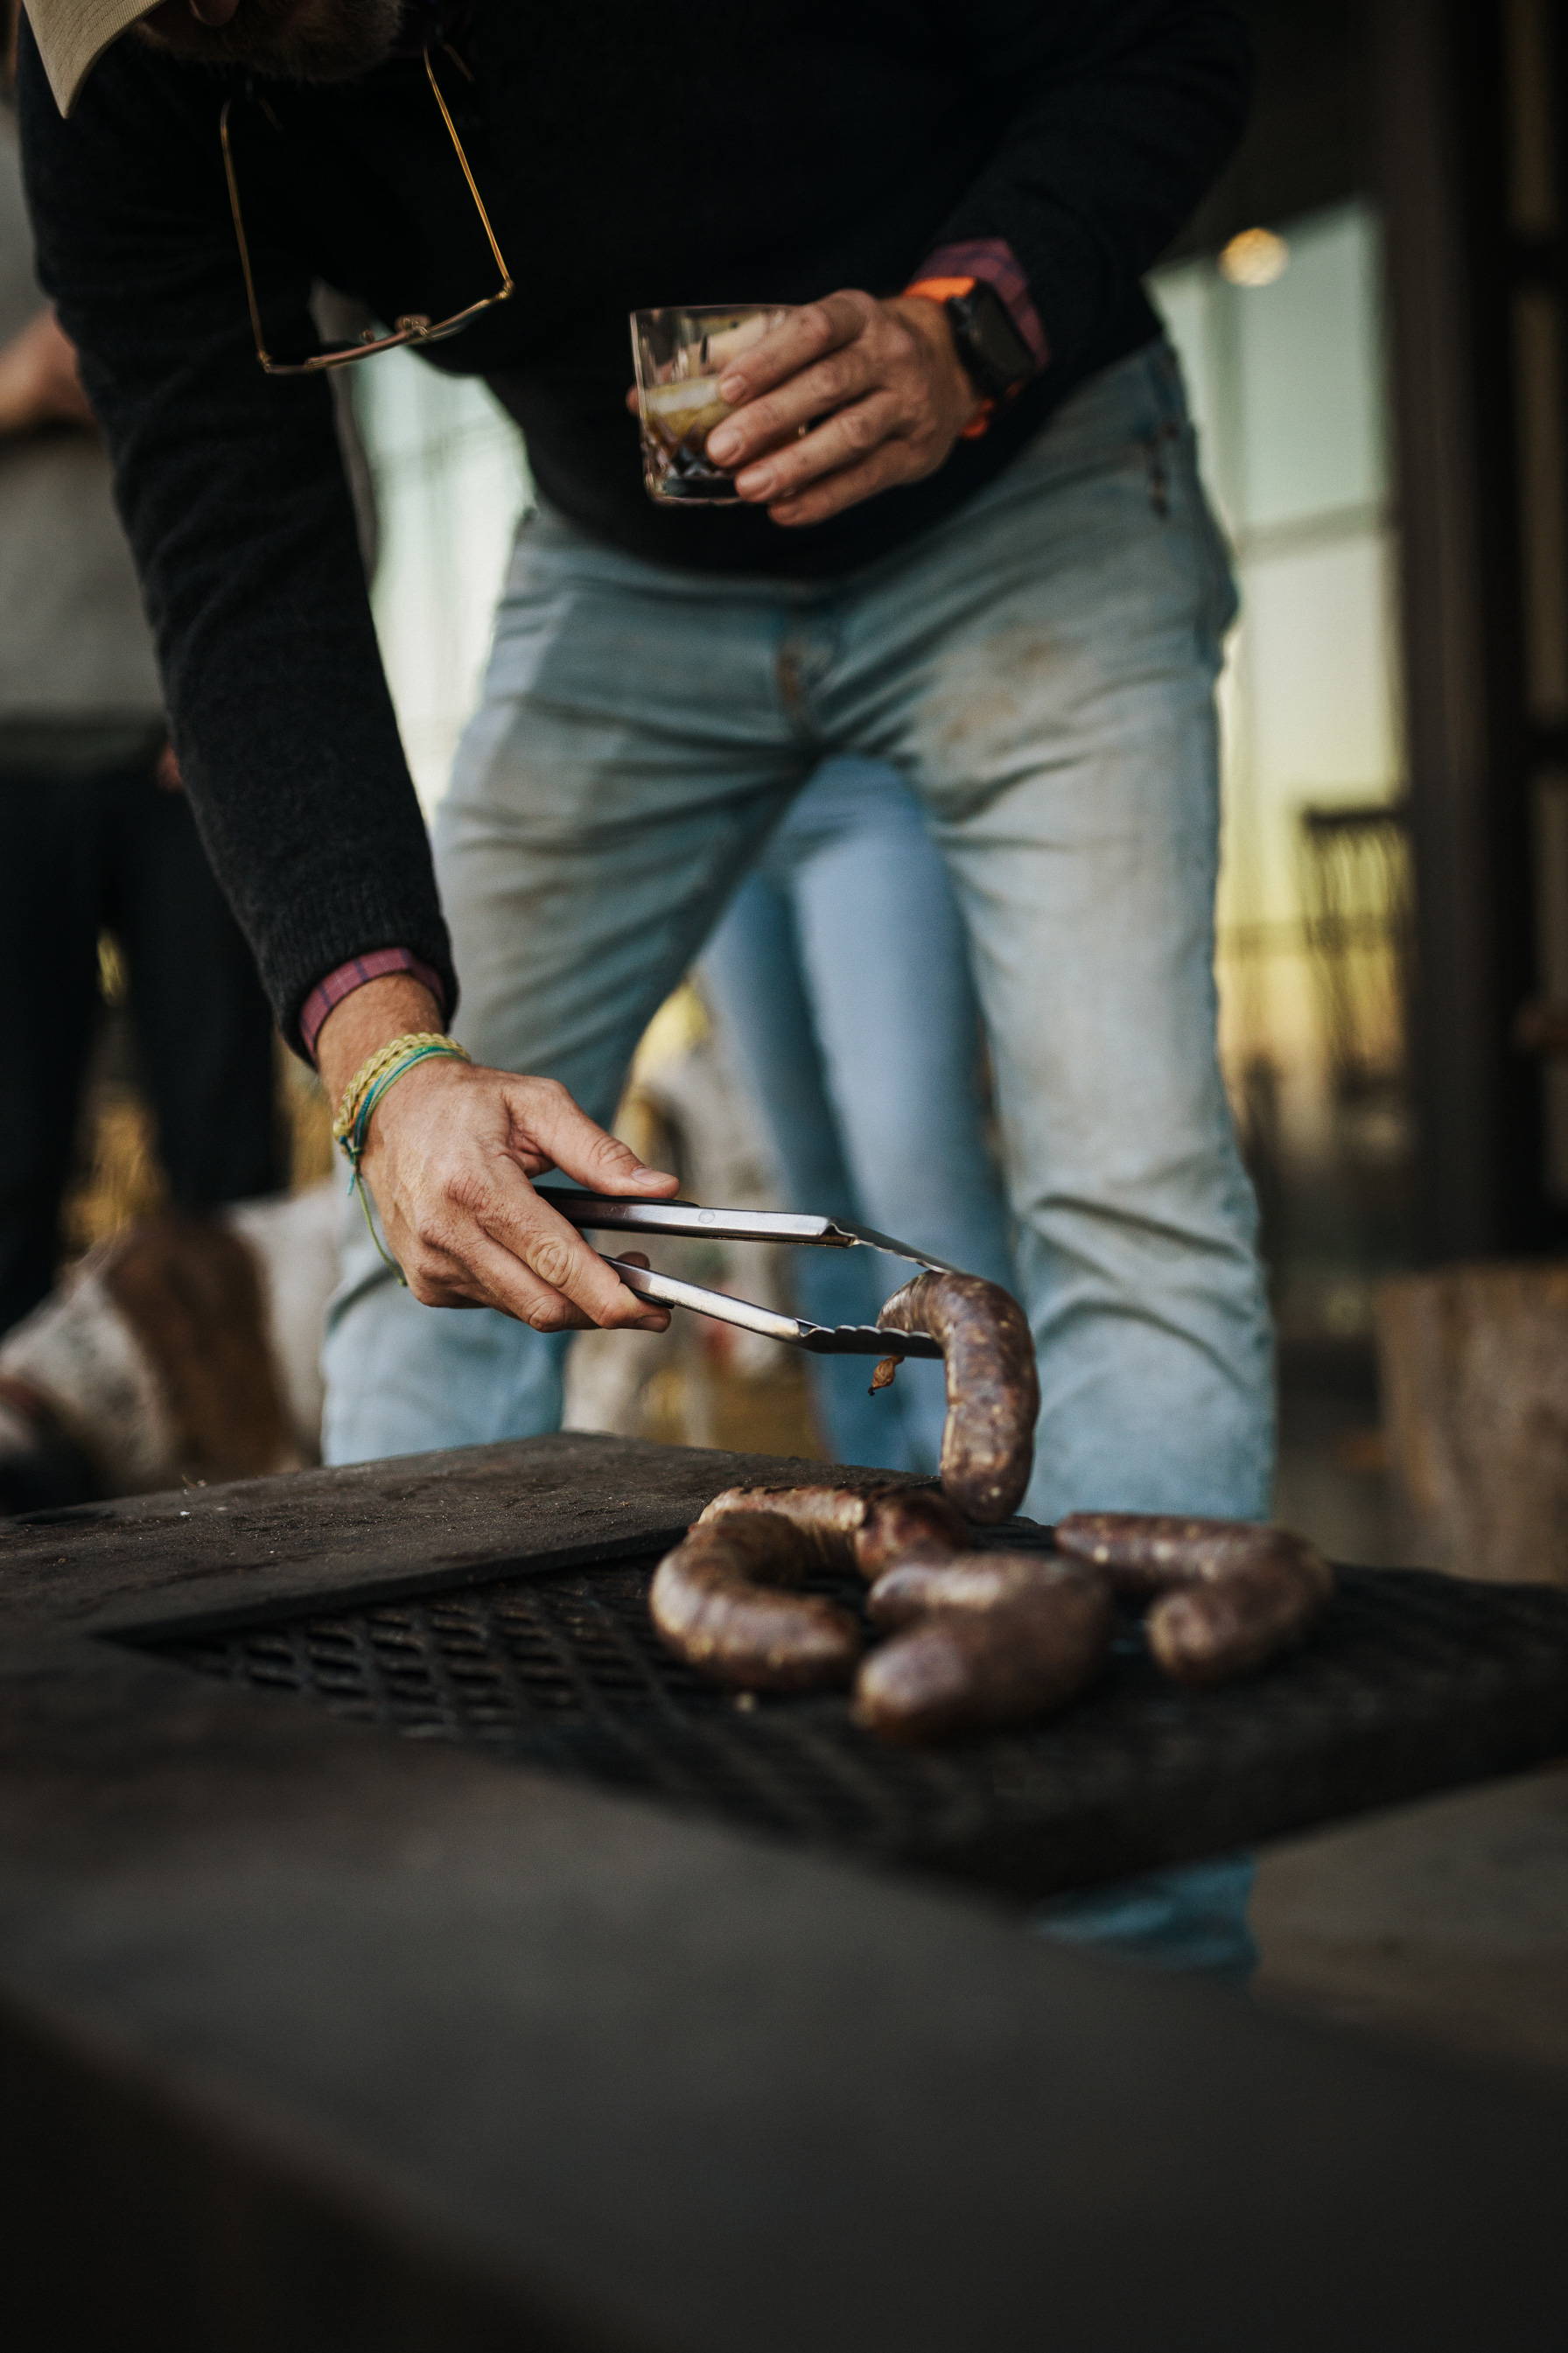 A man flipping sausage on a grill.